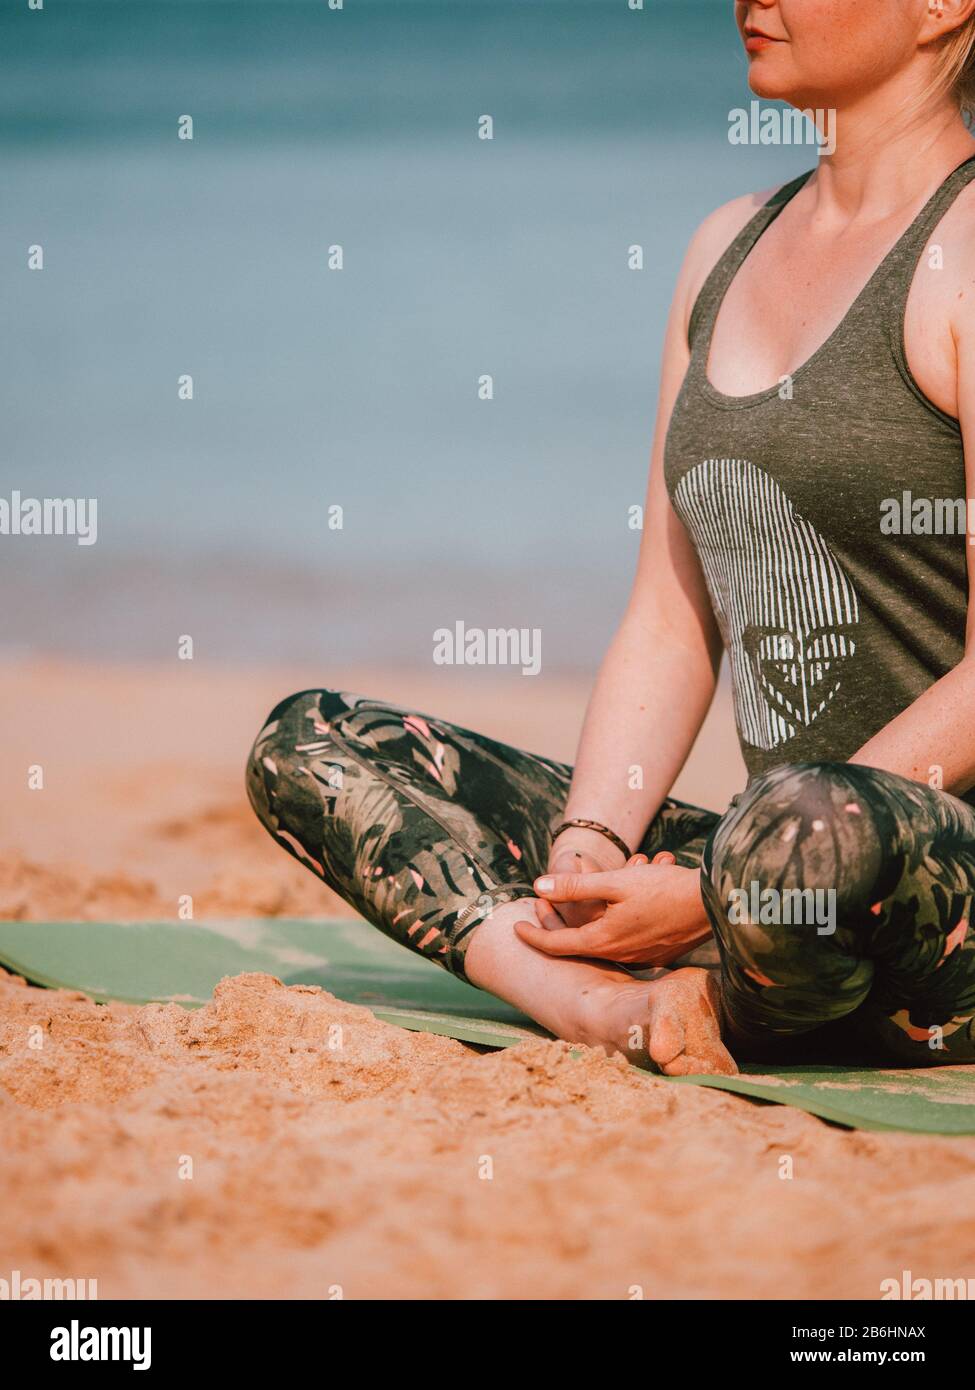 A woman leading a private yoga class on the beach in Western Australia Stock Photo